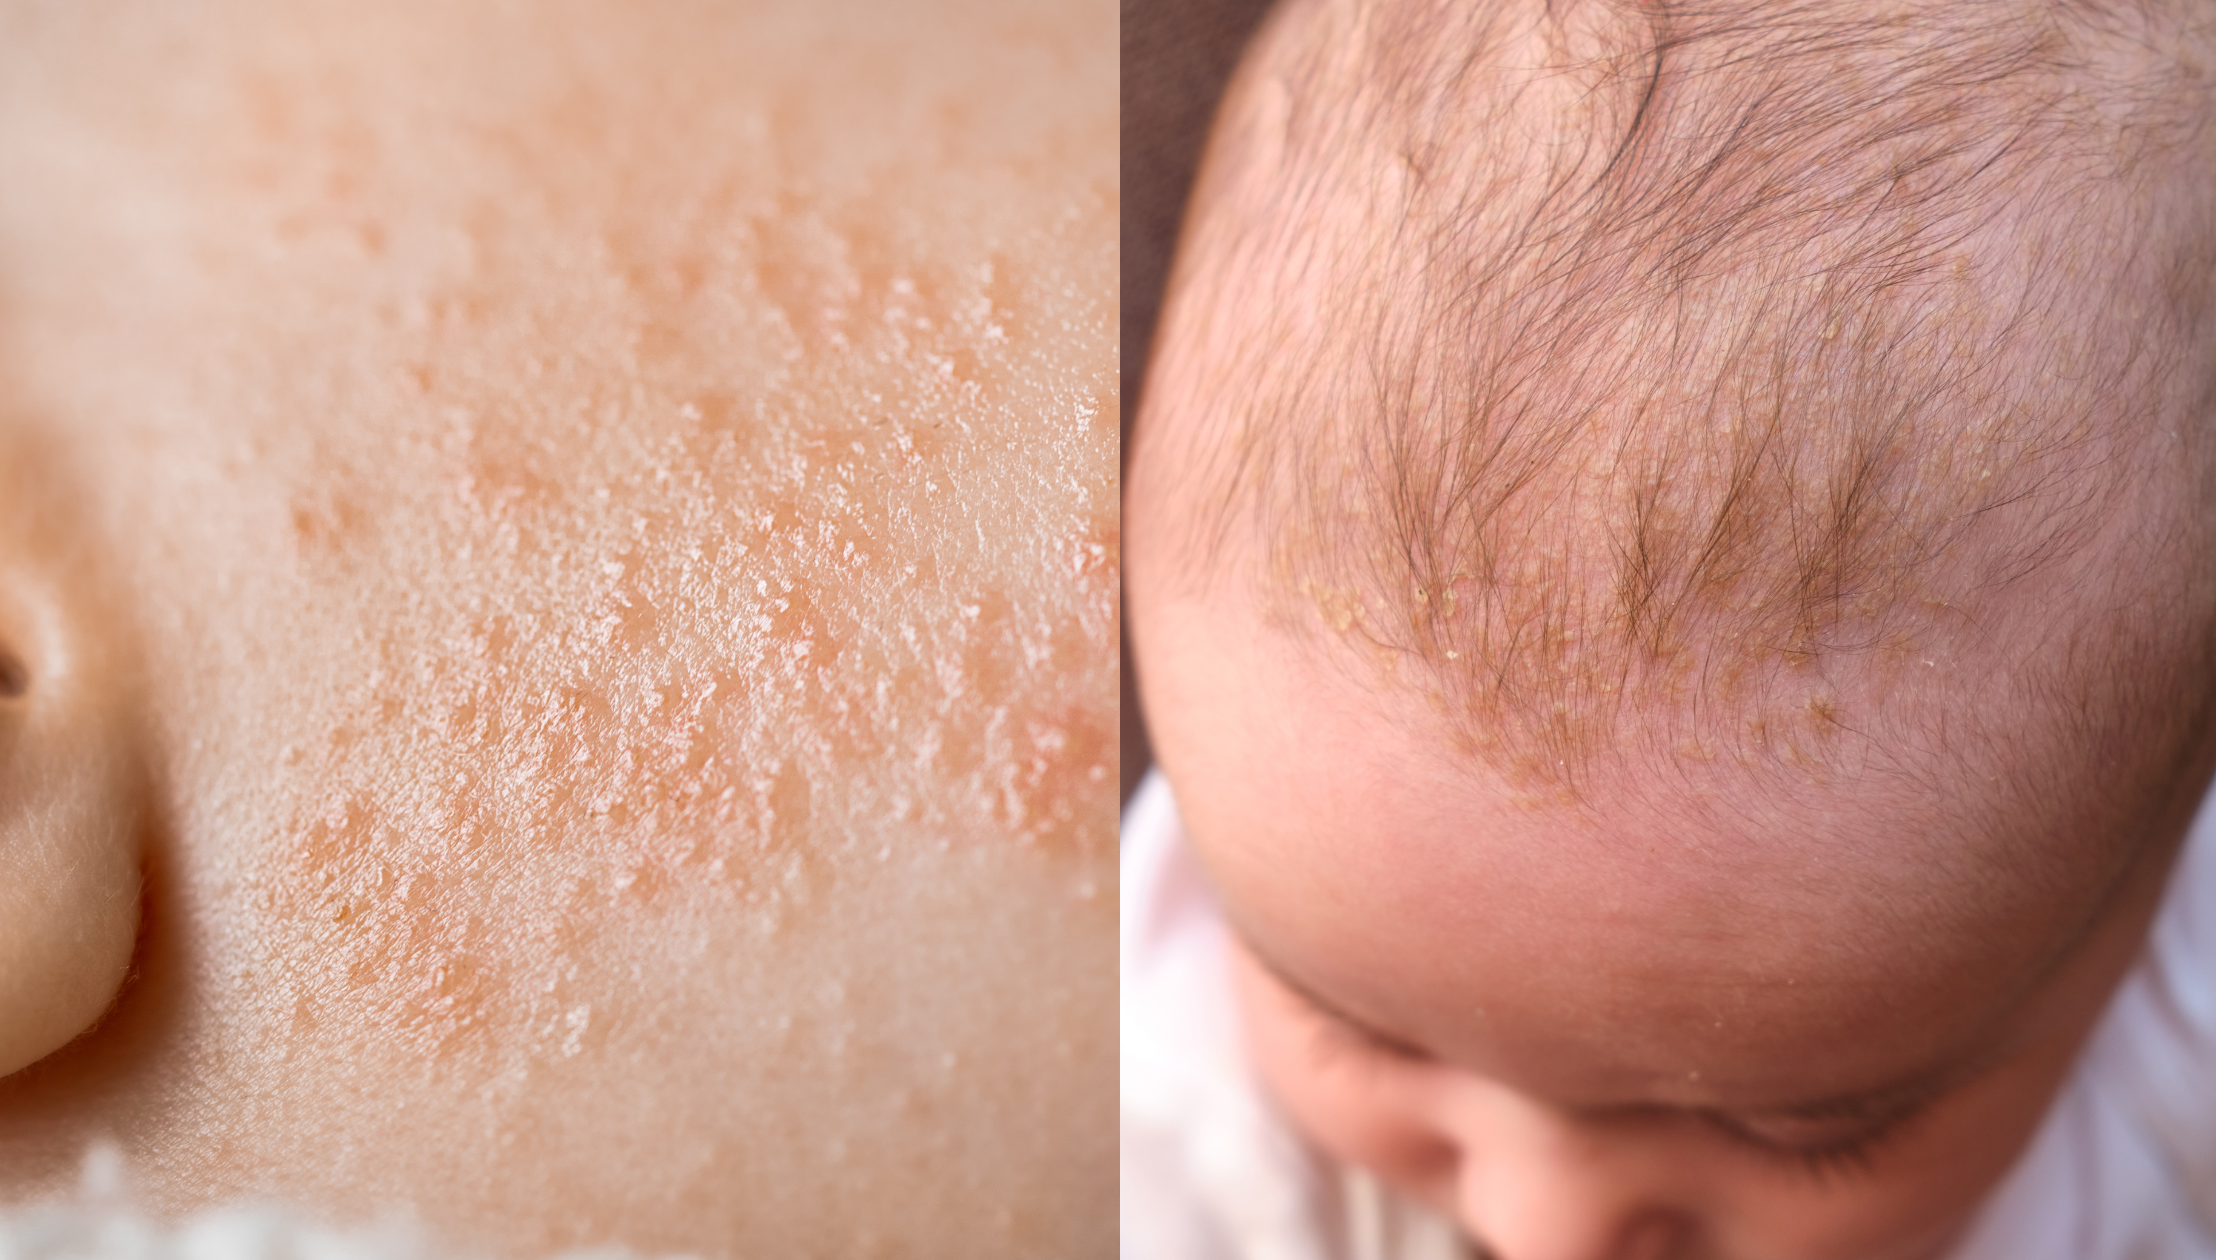 What Are The Differences Between Eczema and Other Skin Rashes?